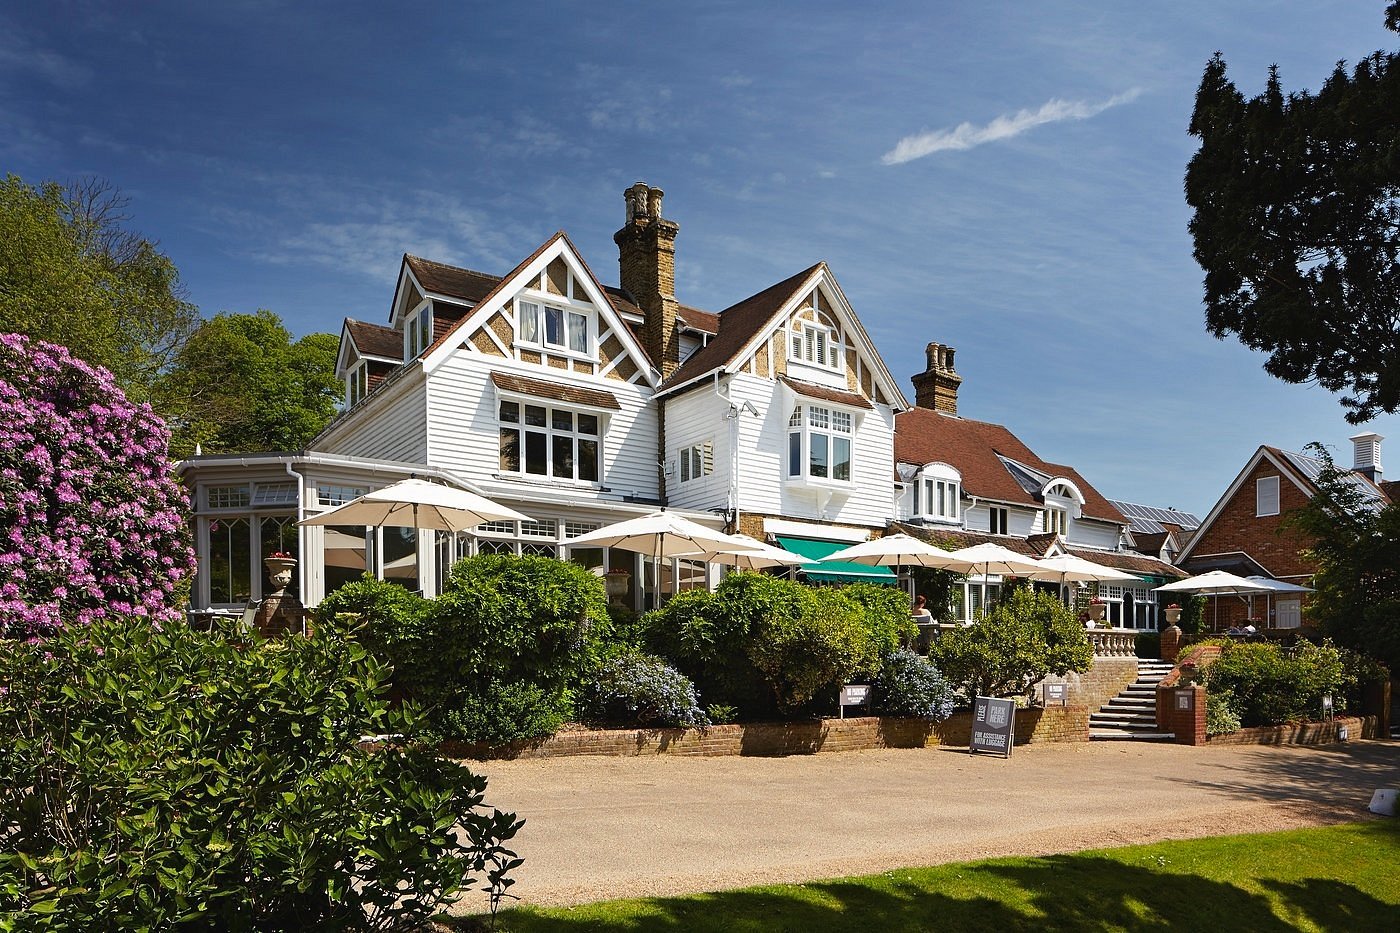 Front image of the Rowhill Grange Hotel, near bluewater in kent